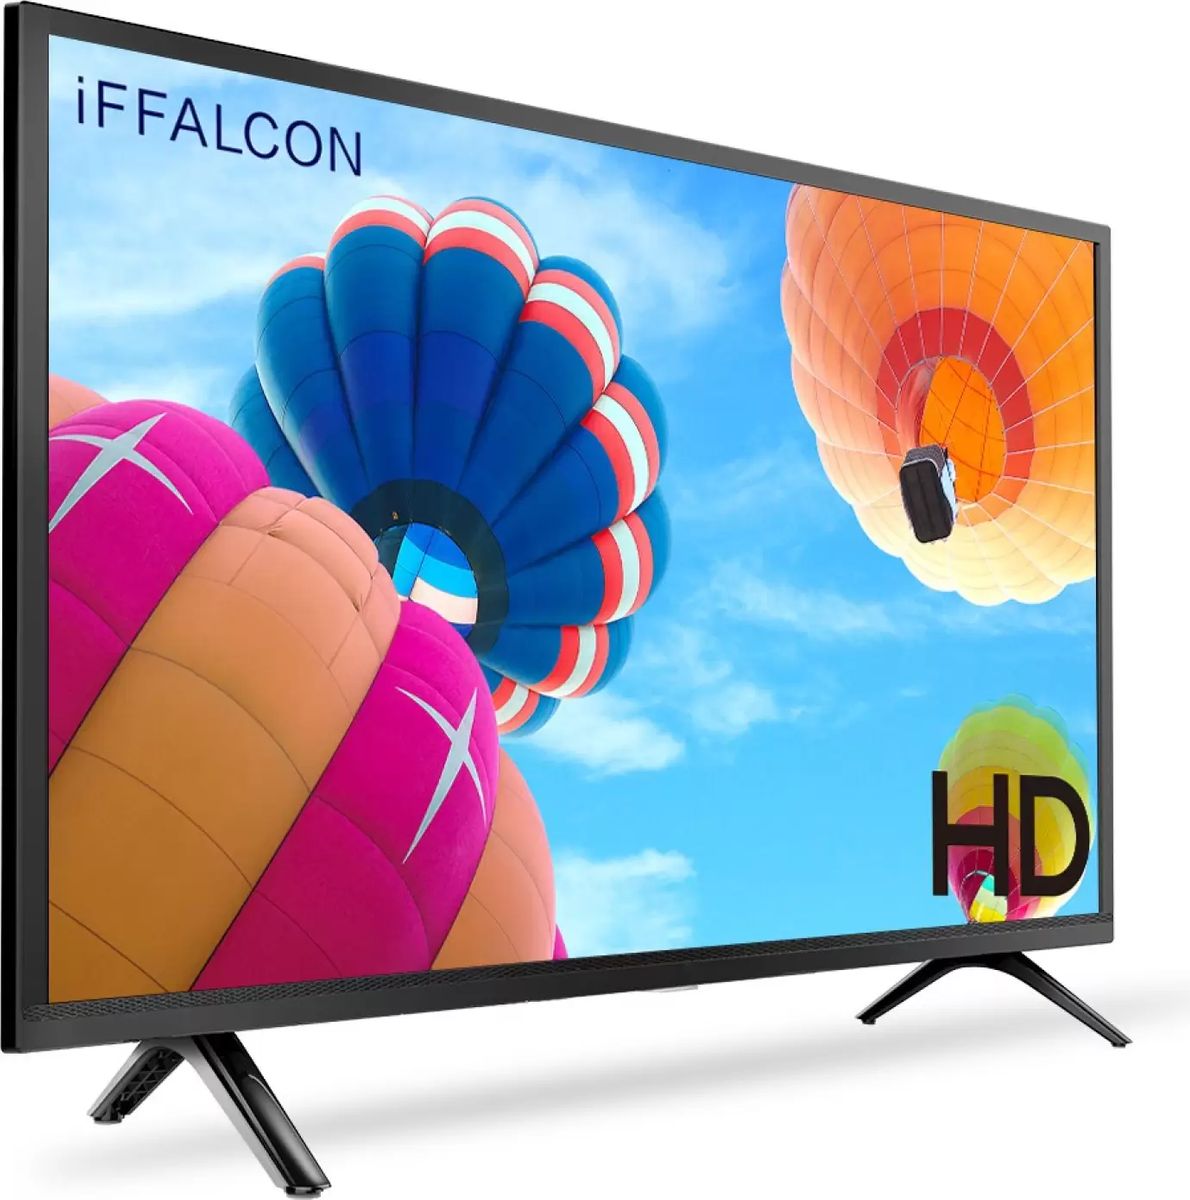 Fab TV Fest Sale Live On Amazon, Up To 50% Off On TVs